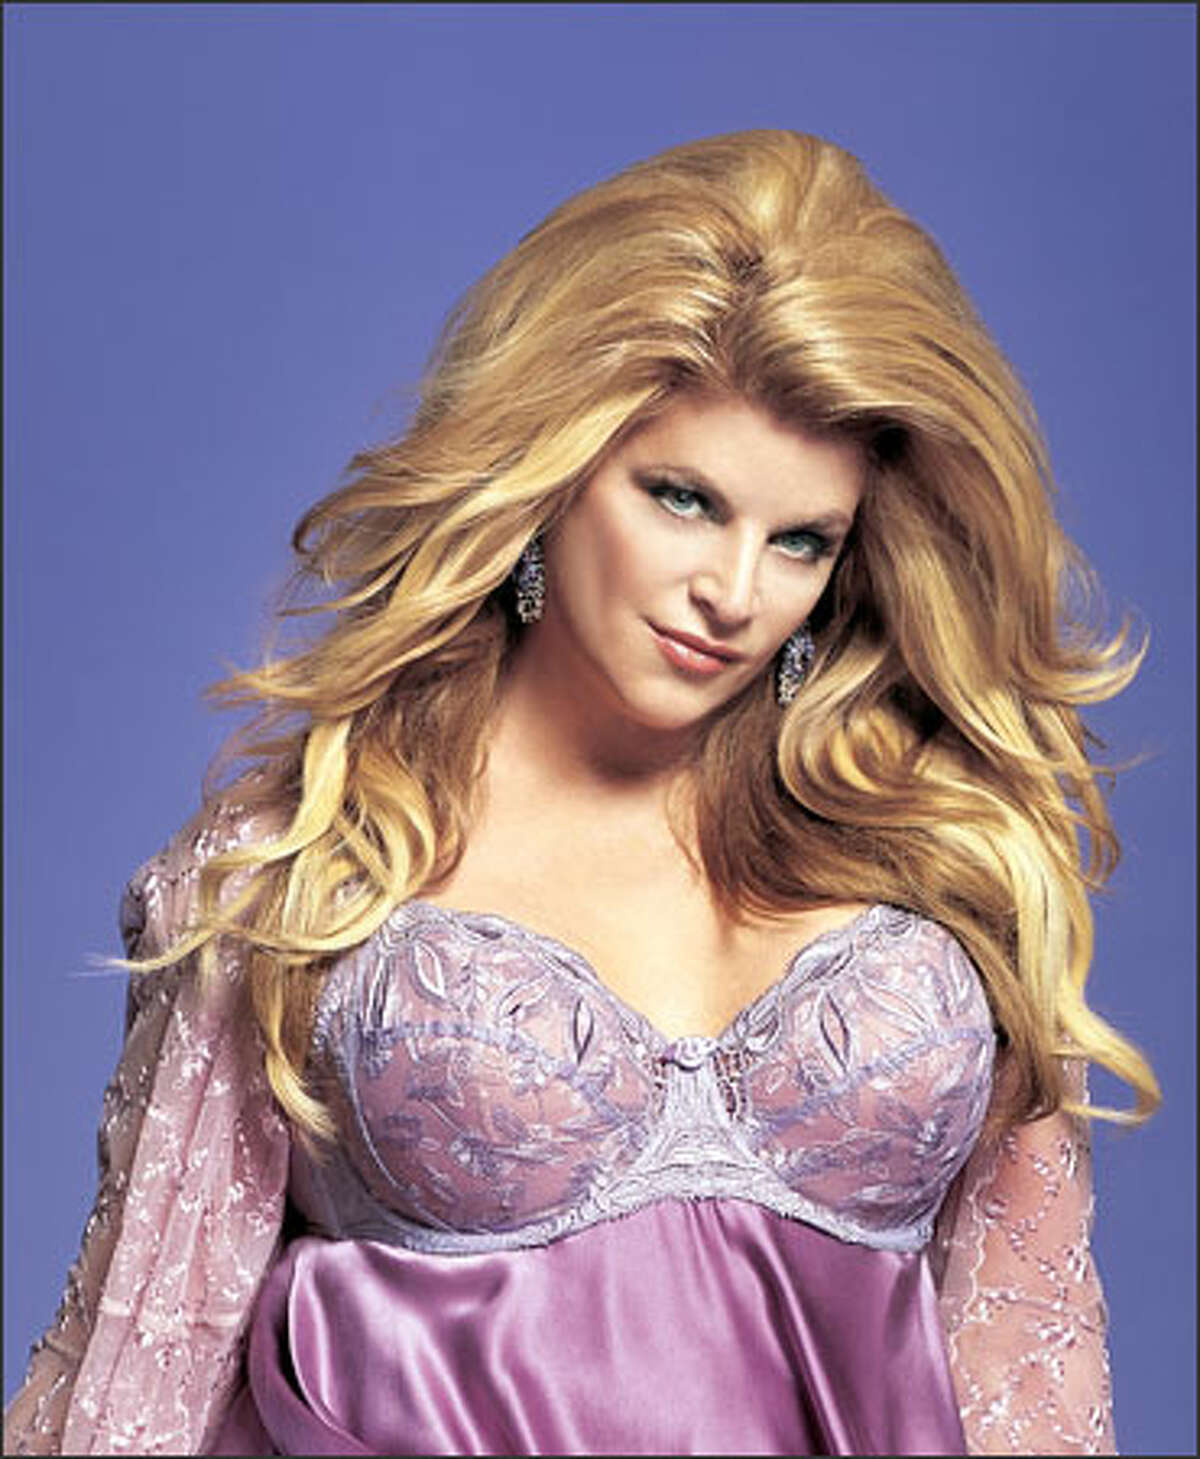 Kirstie Alley's new role is a good fit.